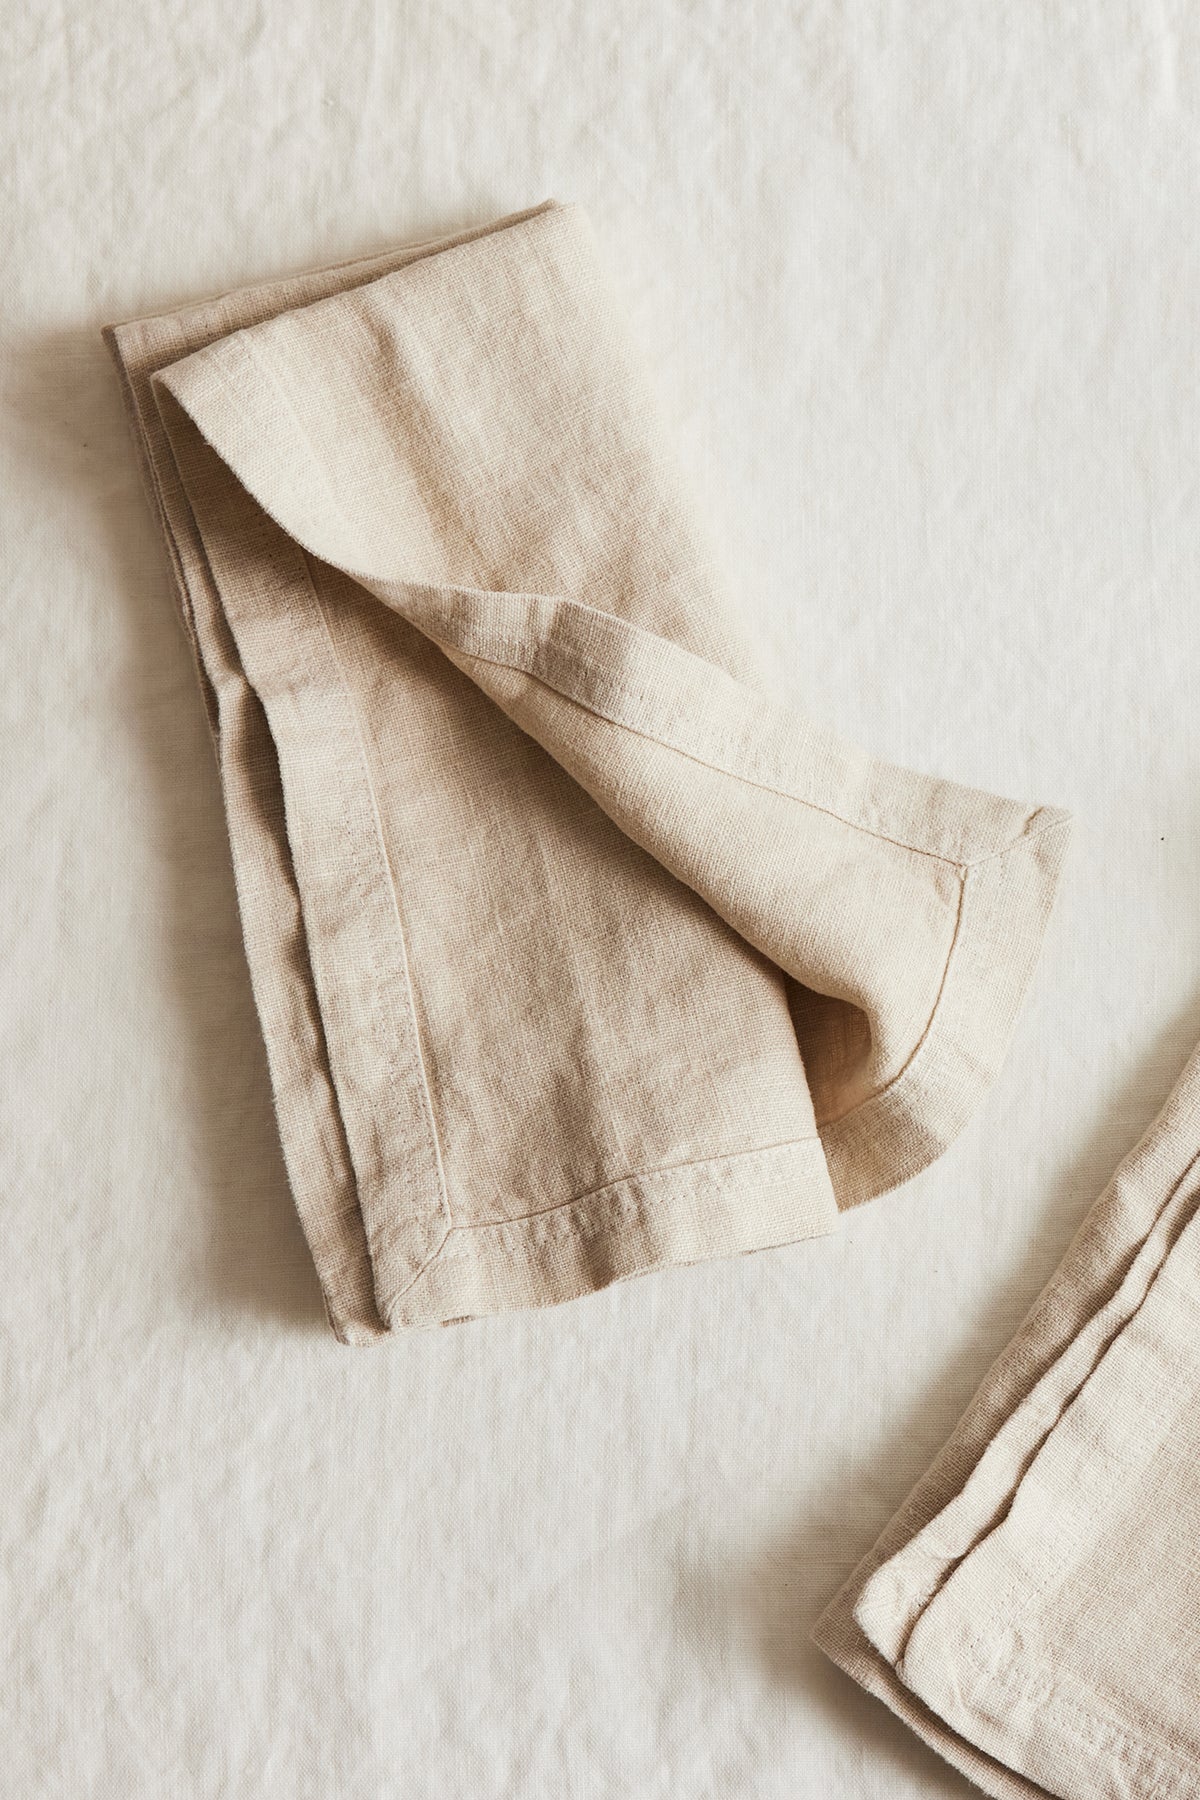   A set of Jenny Graham Home luxe finish linen napkins, an everyday kitchen essential, on a white surface. 